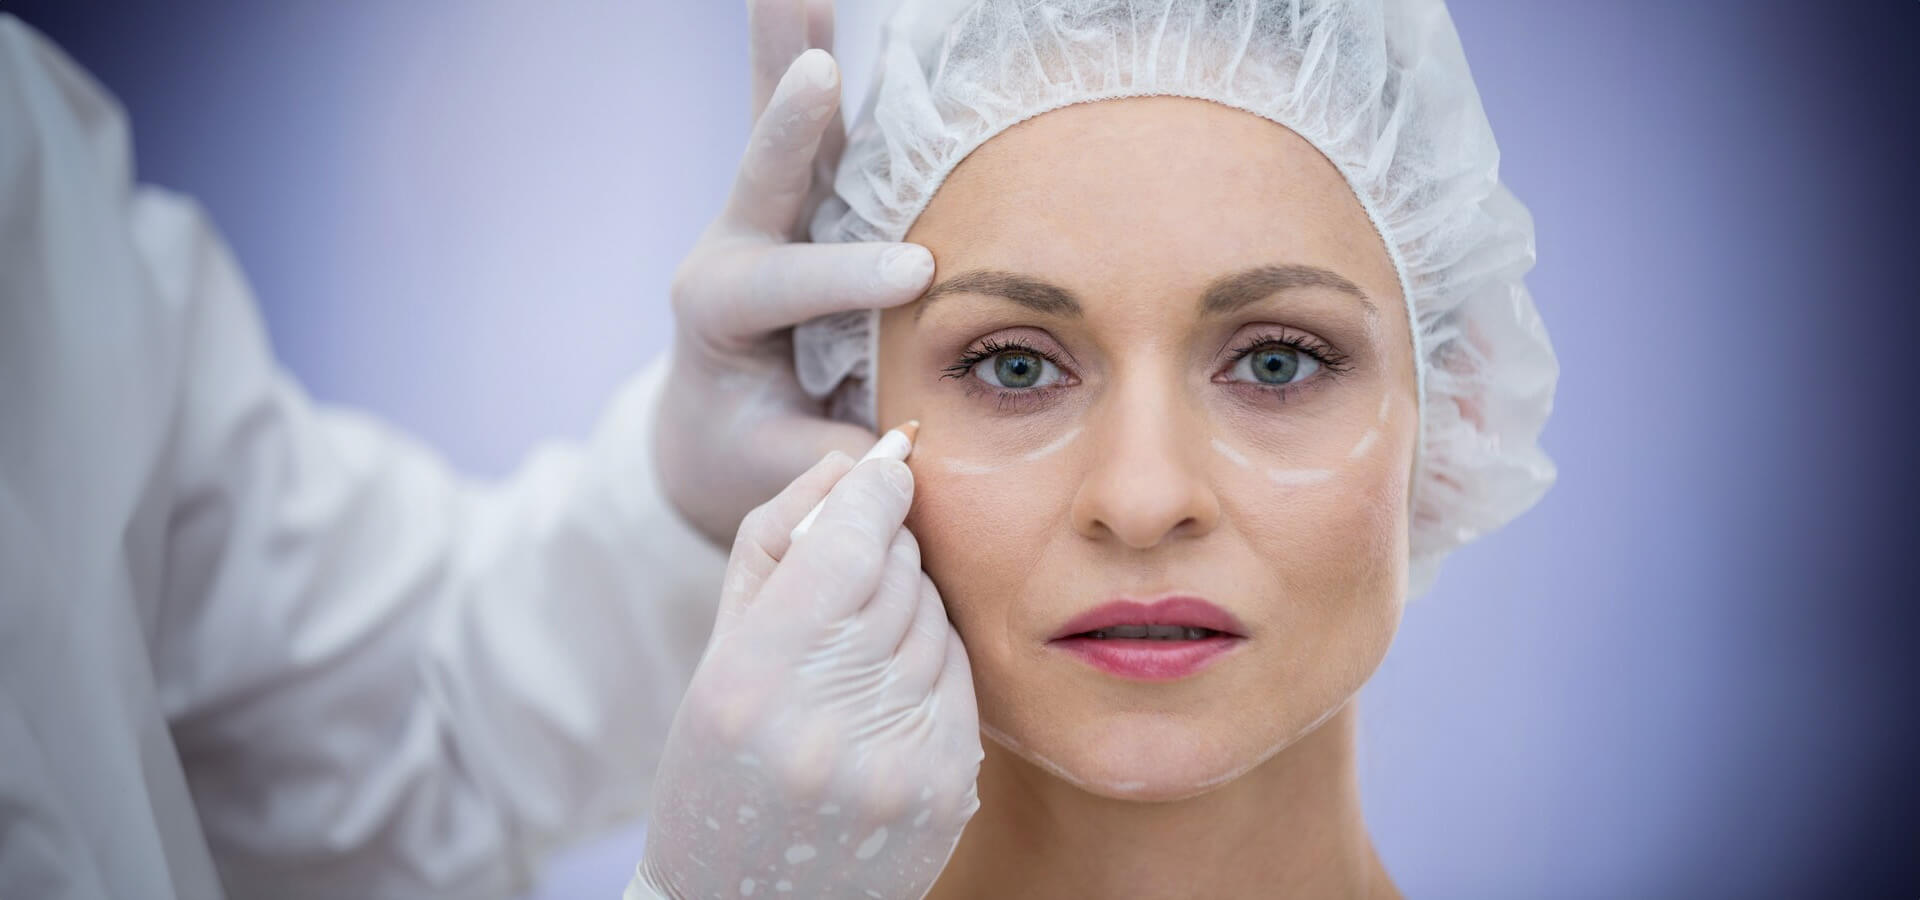 Is Plastic Surgery In New York Right for You?